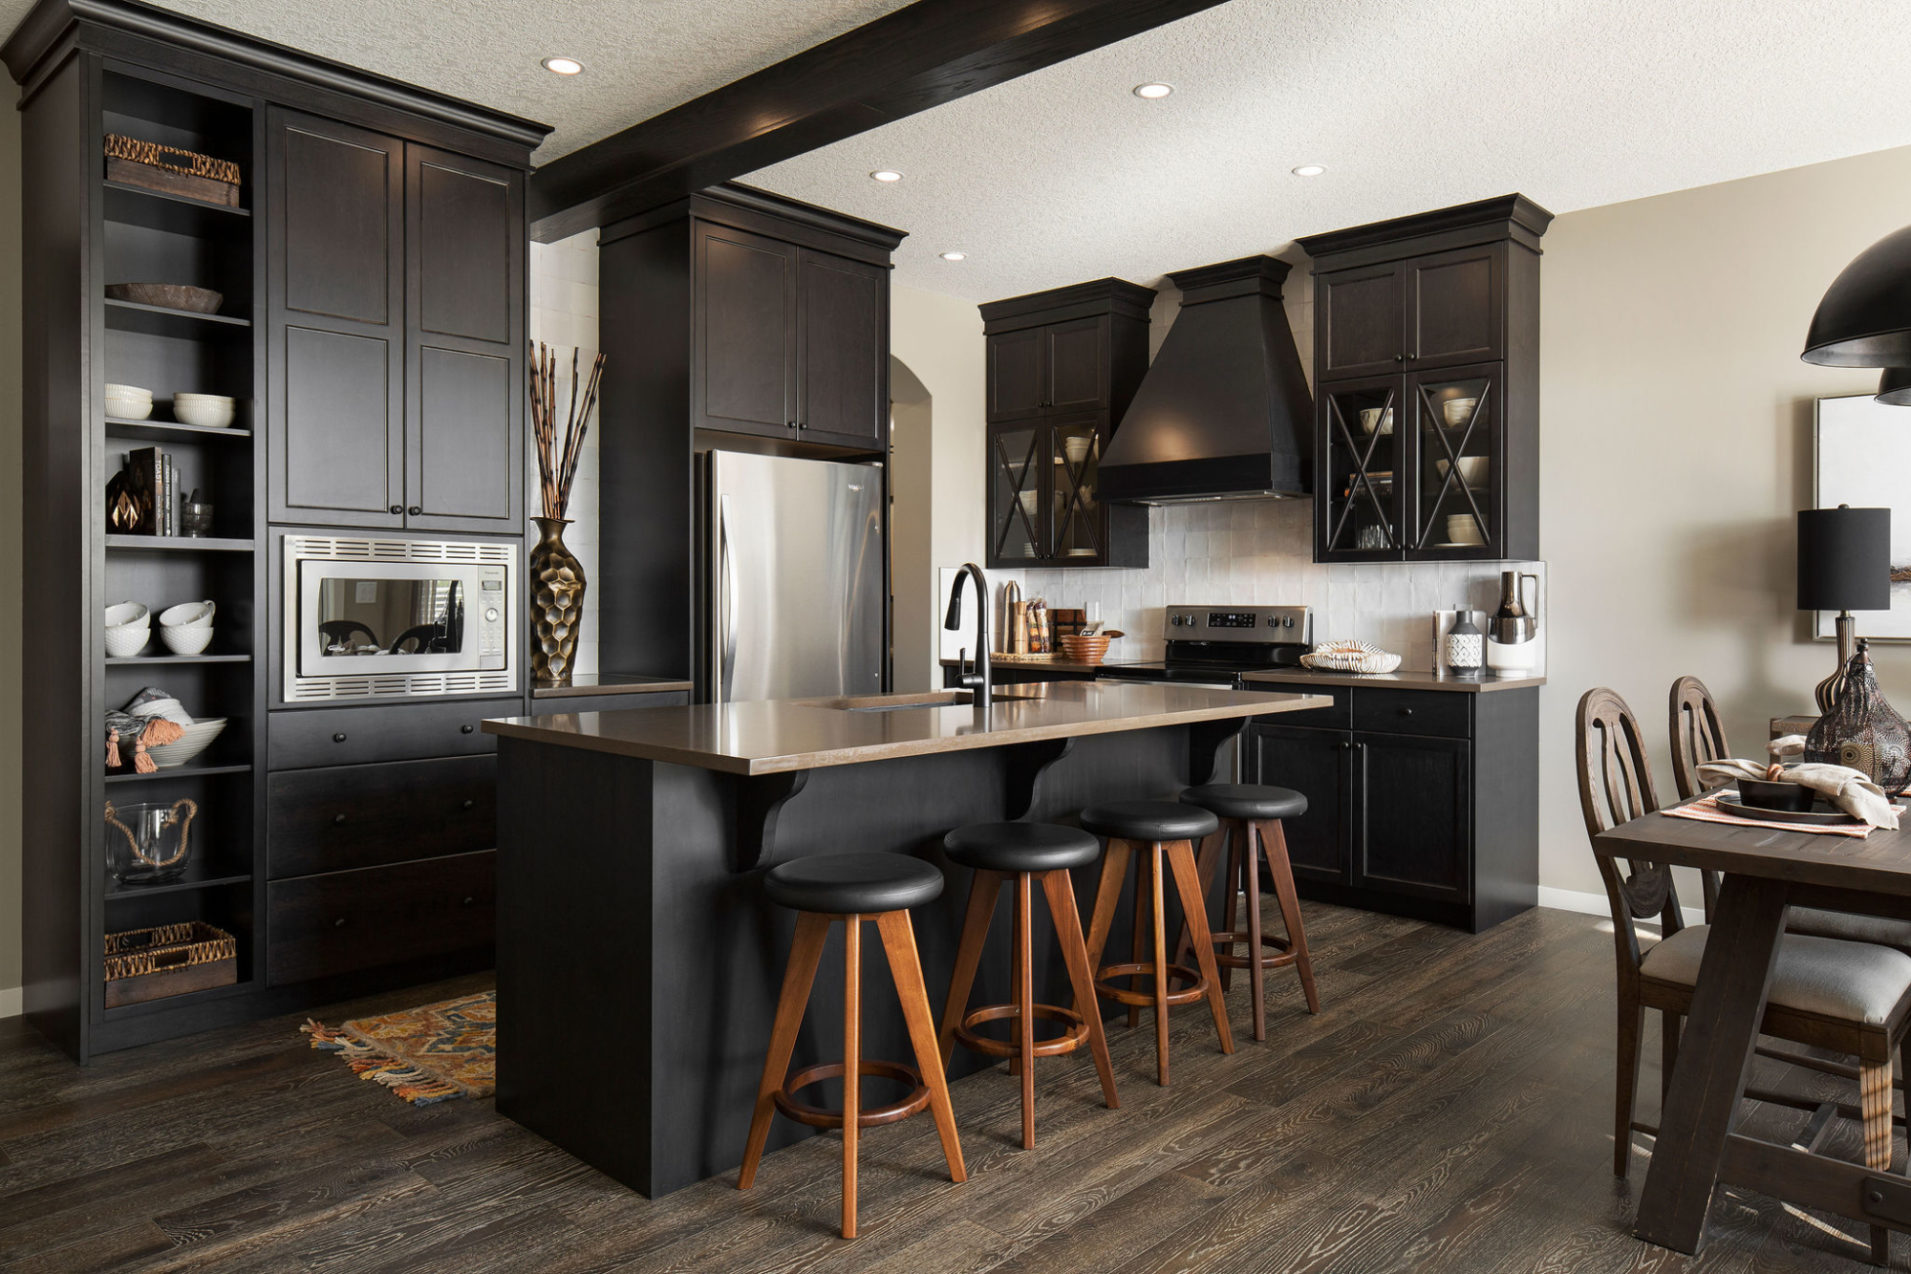 A kitchen with dark brown cabinets, wooden floors, and an island.